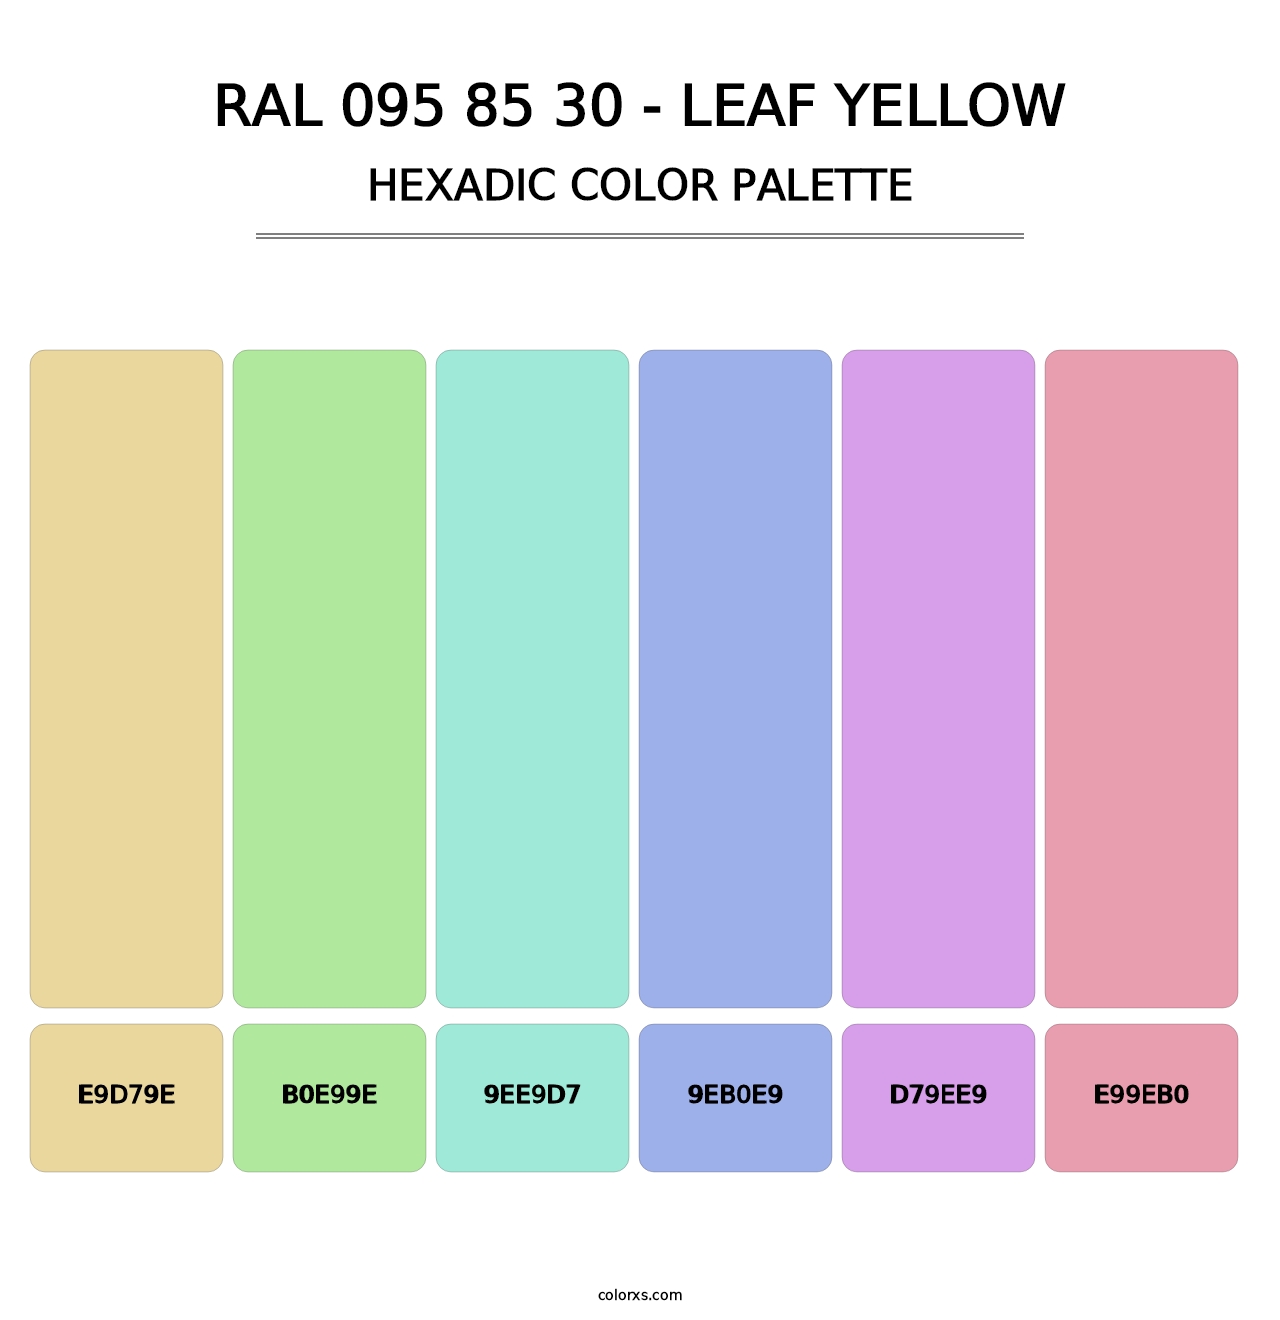 RAL 095 85 30 - Leaf Yellow - Hexadic Color Palette